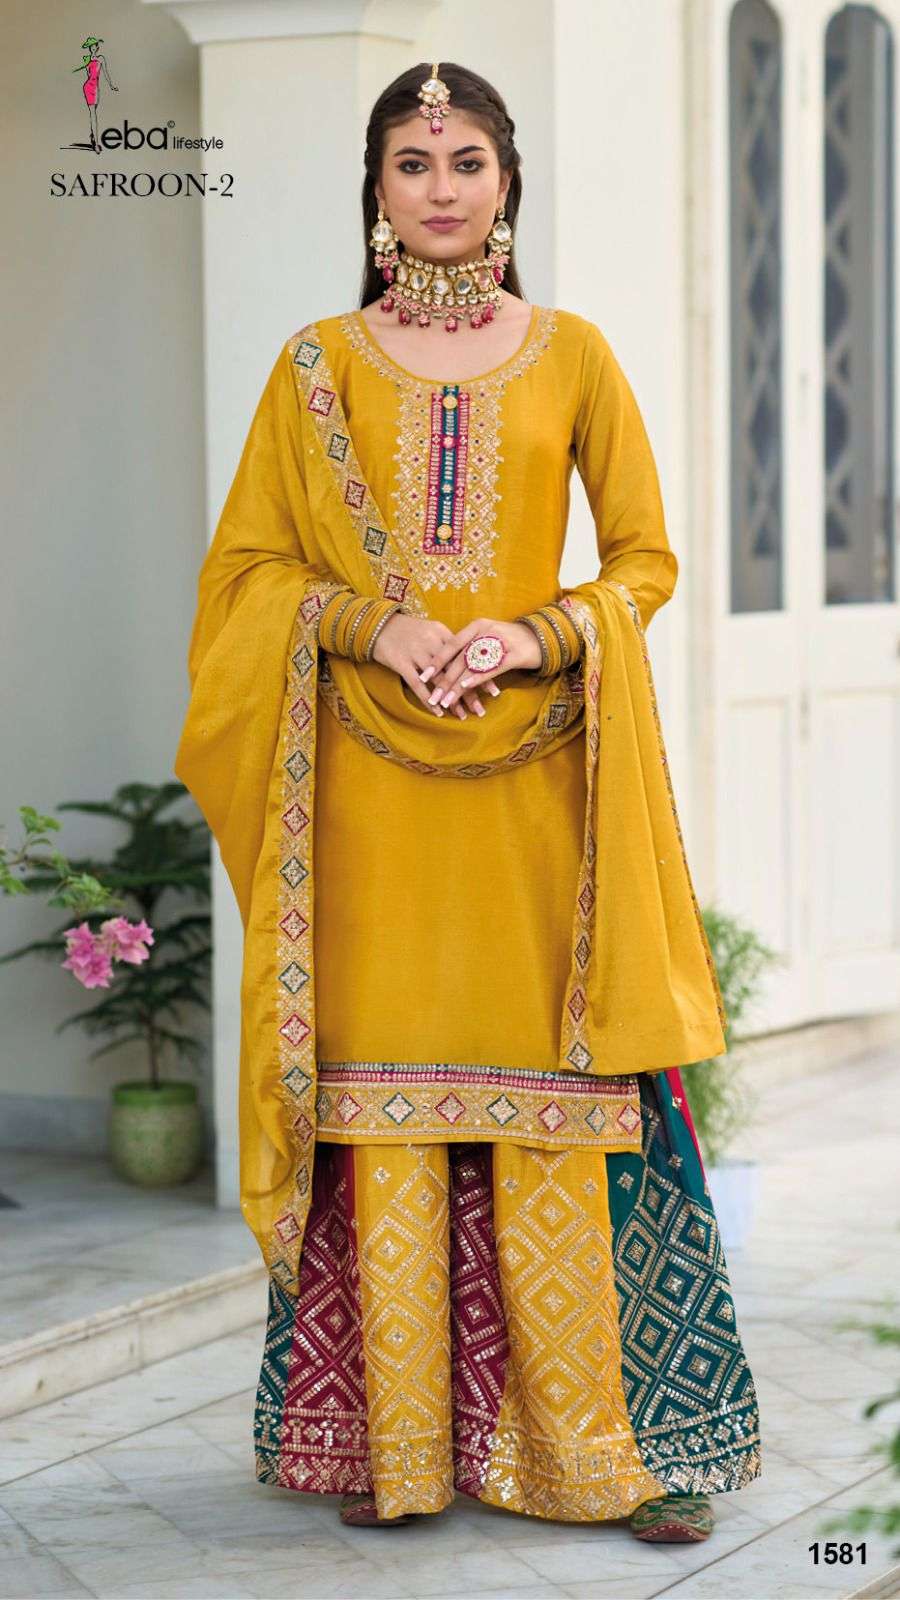 eba lifestyle catalogue safroon 2 series 1581 to 1583 sharara suit with heavy embroidery partywear designer 3 colours different colour one sharara suit 